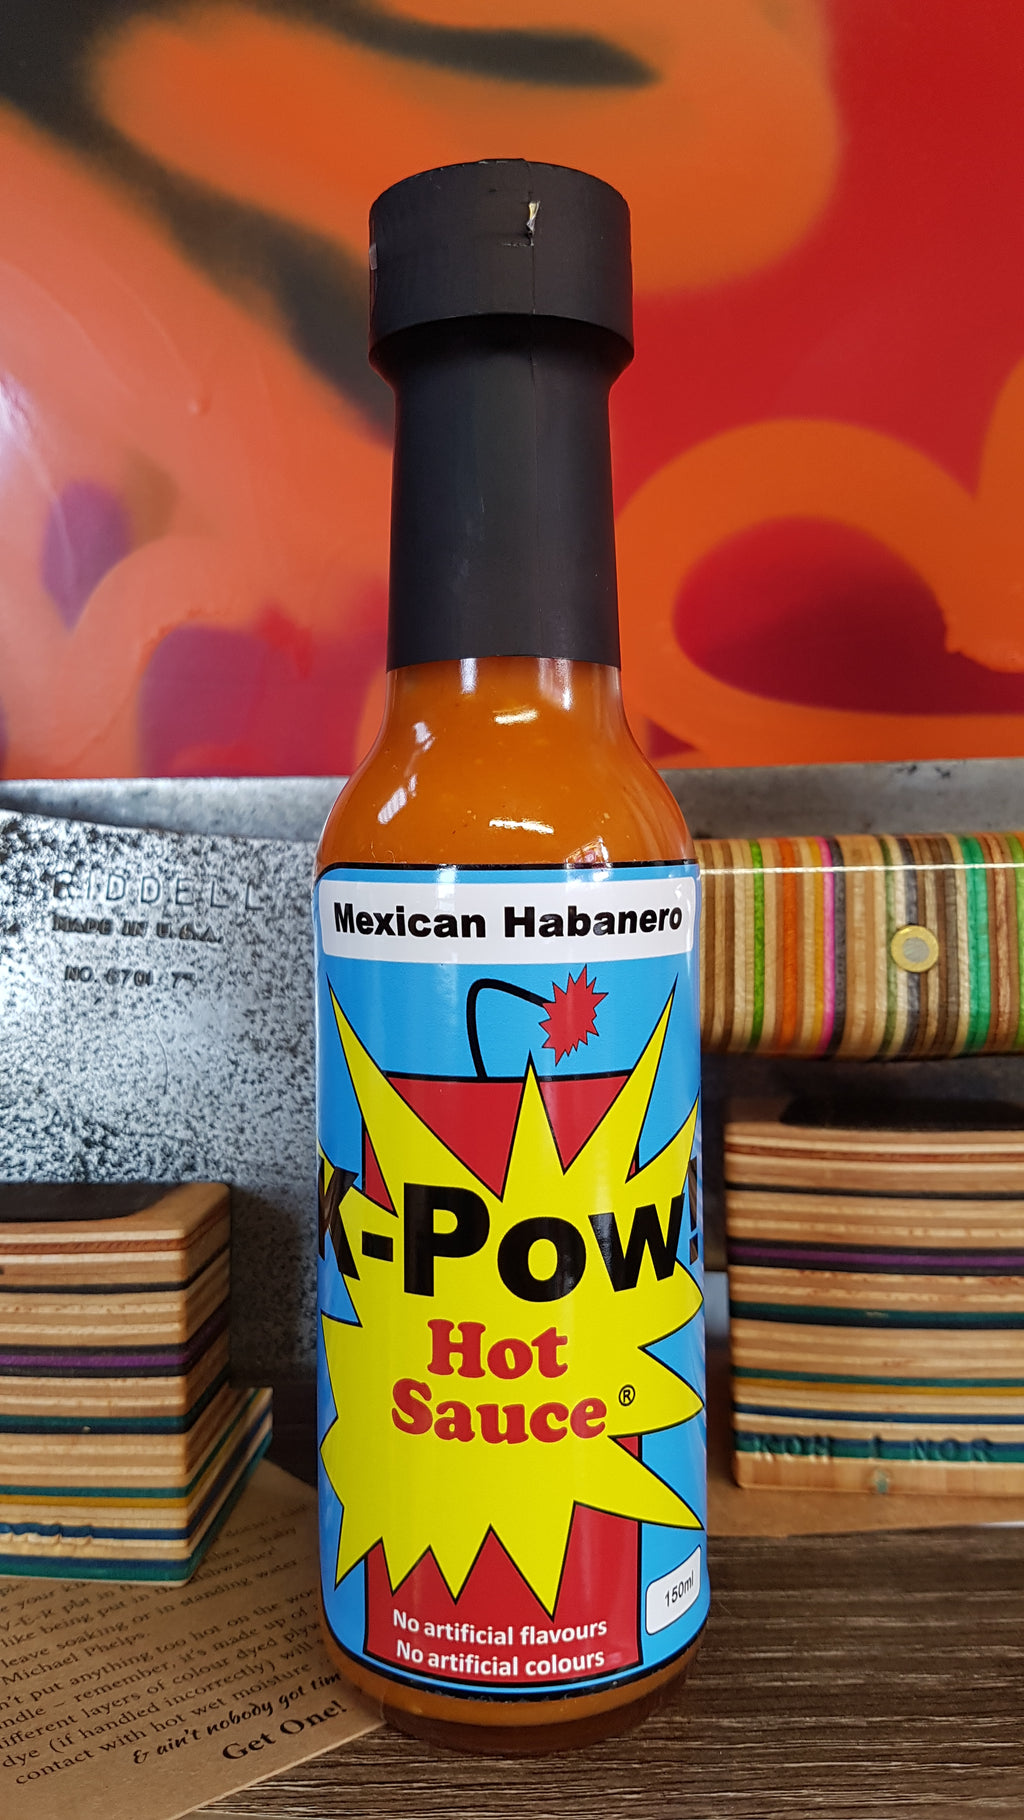 Mexican Habanero Sauce 150ml by K-Pow